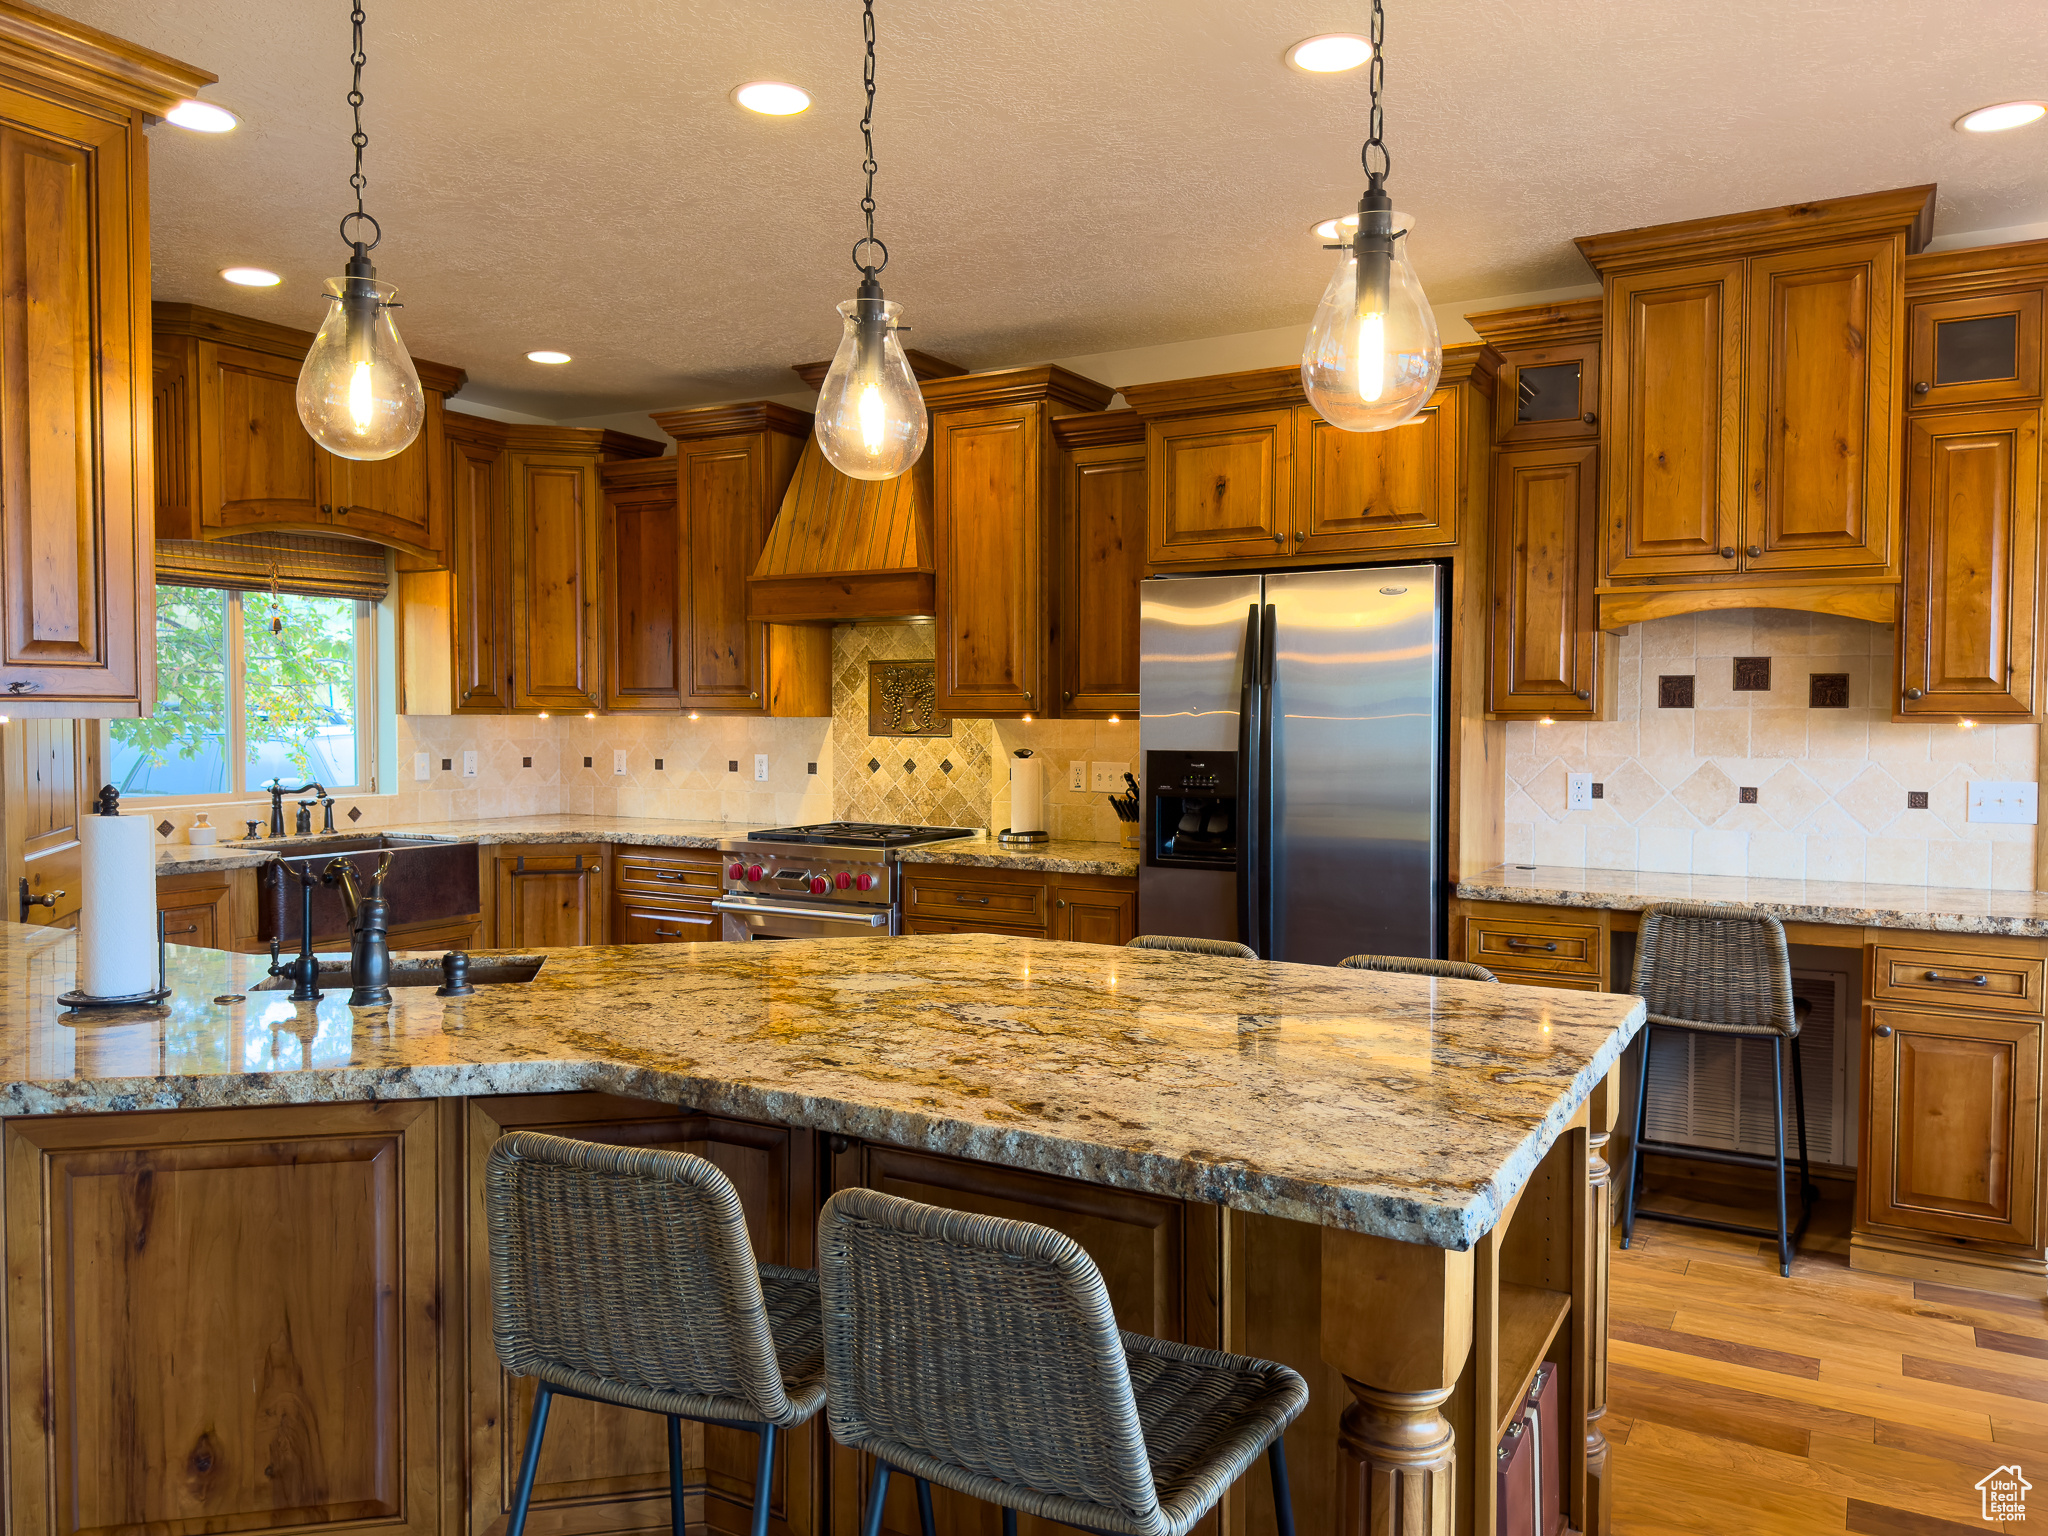 Kitchen with tasteful backsplash, appliances with stainless steel finishes, and pendant lighting